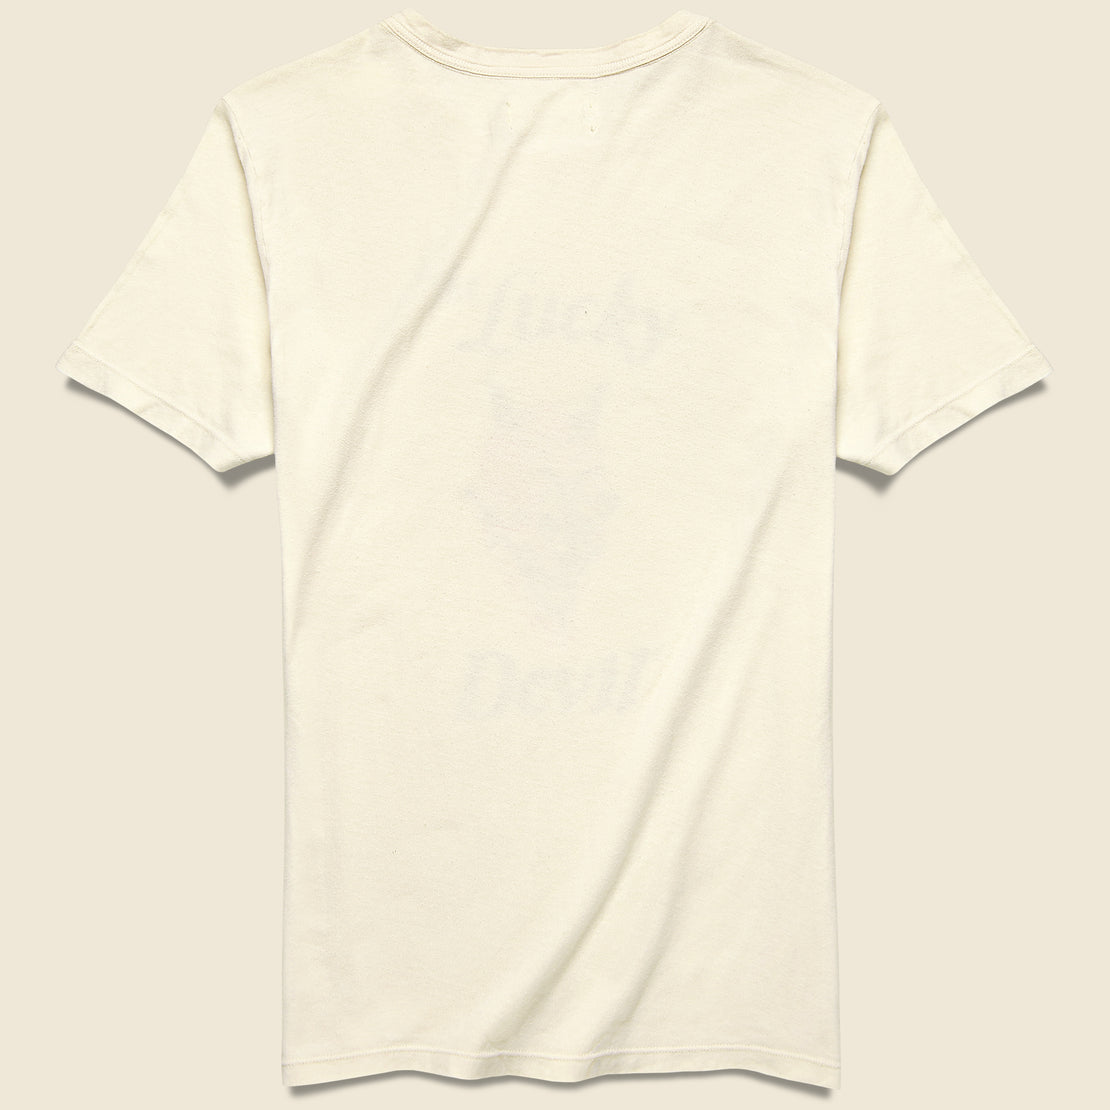 Lucky Devil Tee - White - Imogene + Willie - STAG Provisions - Tops - S/S Tee - Graphic